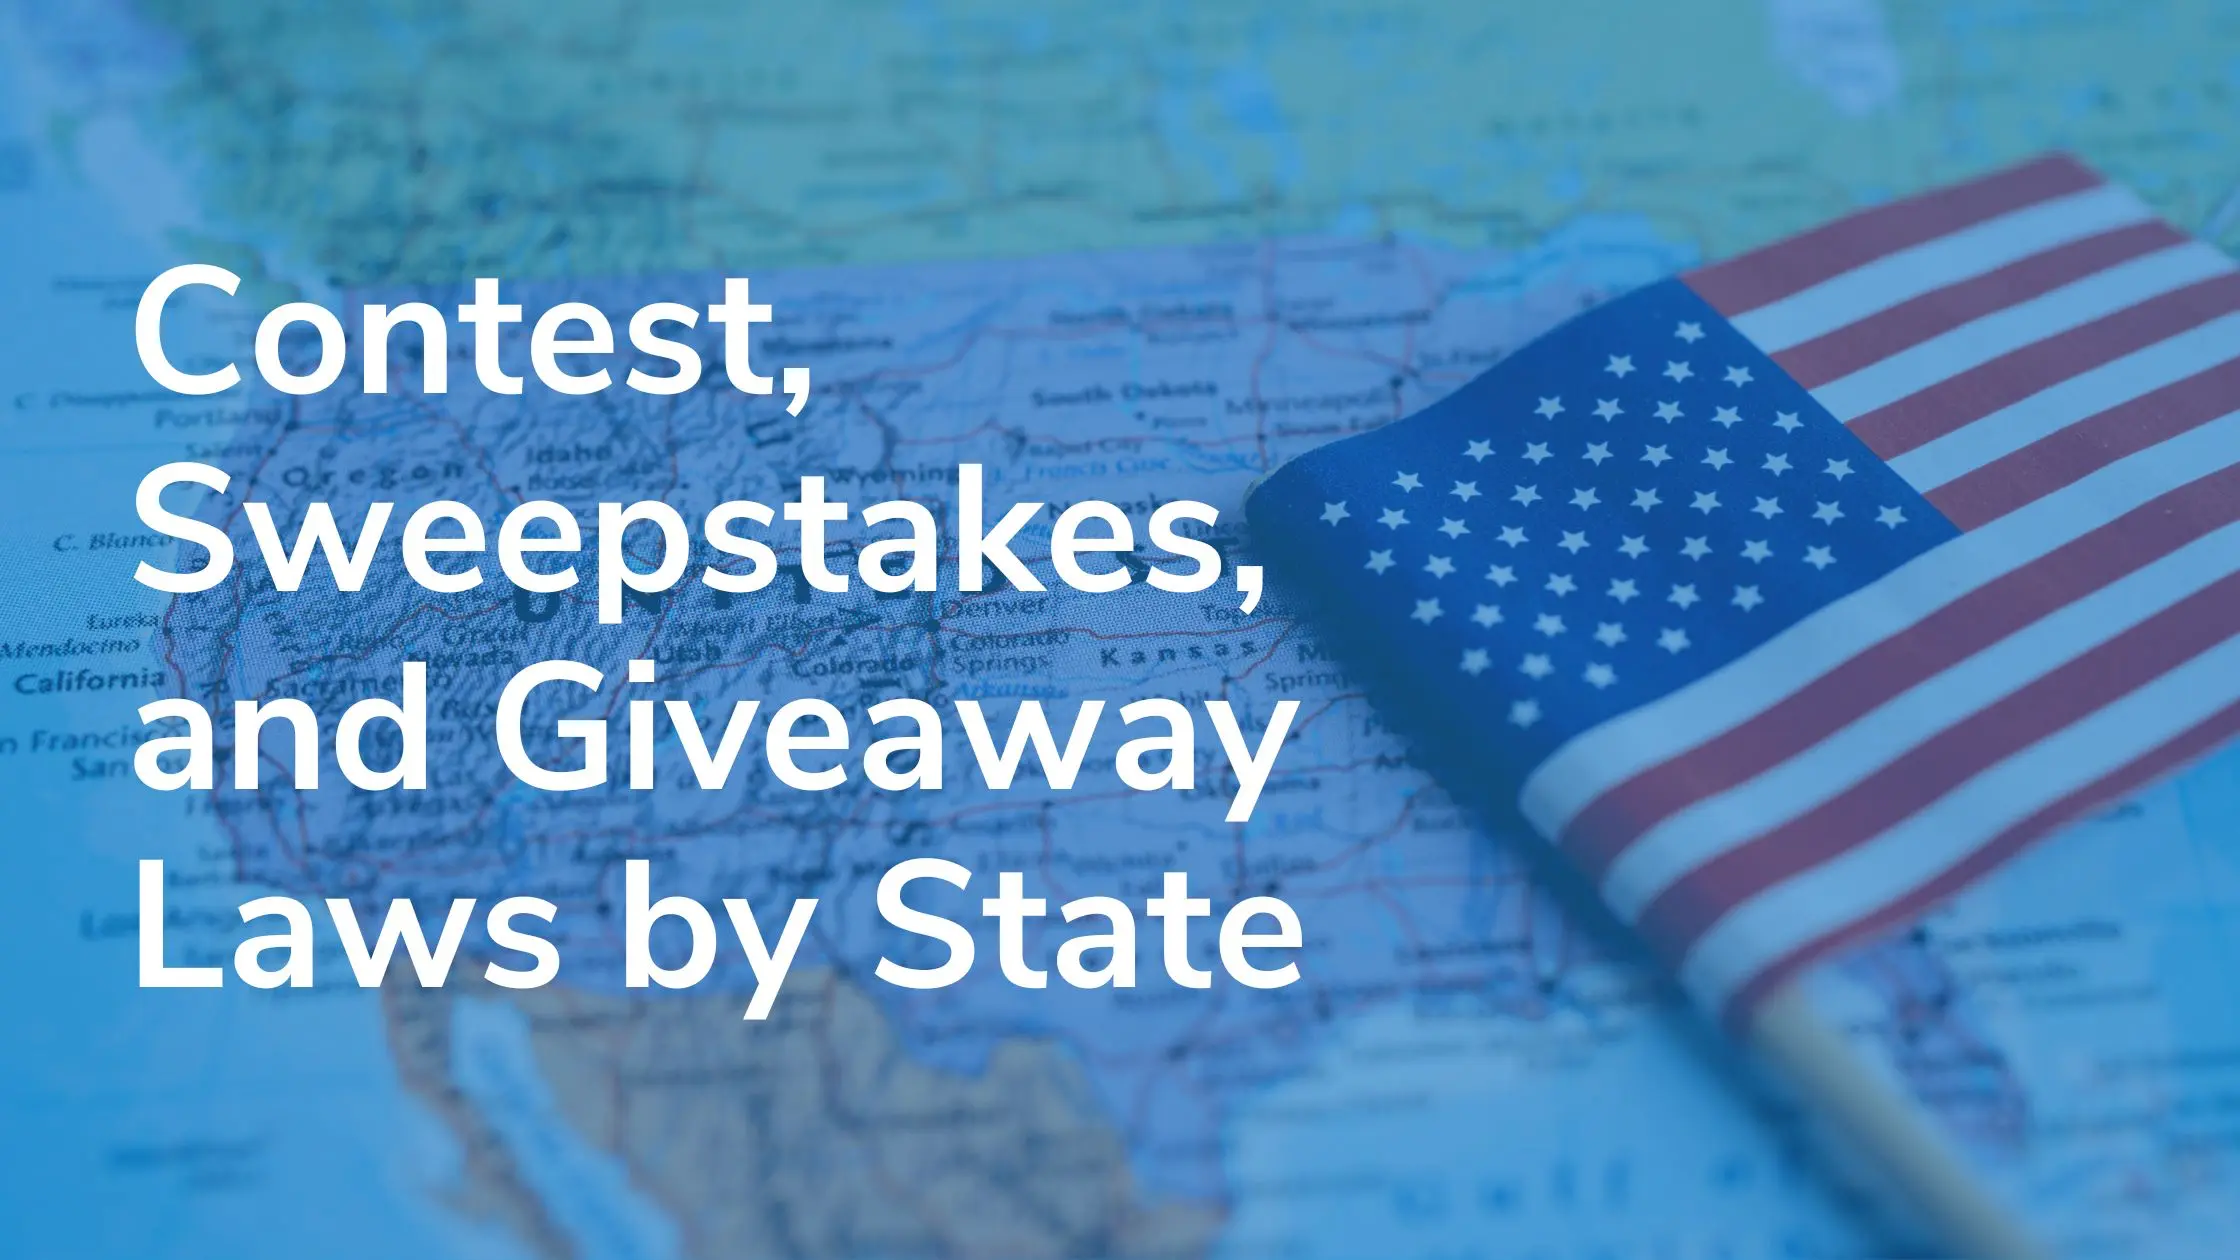 State by State Giveaway Laws